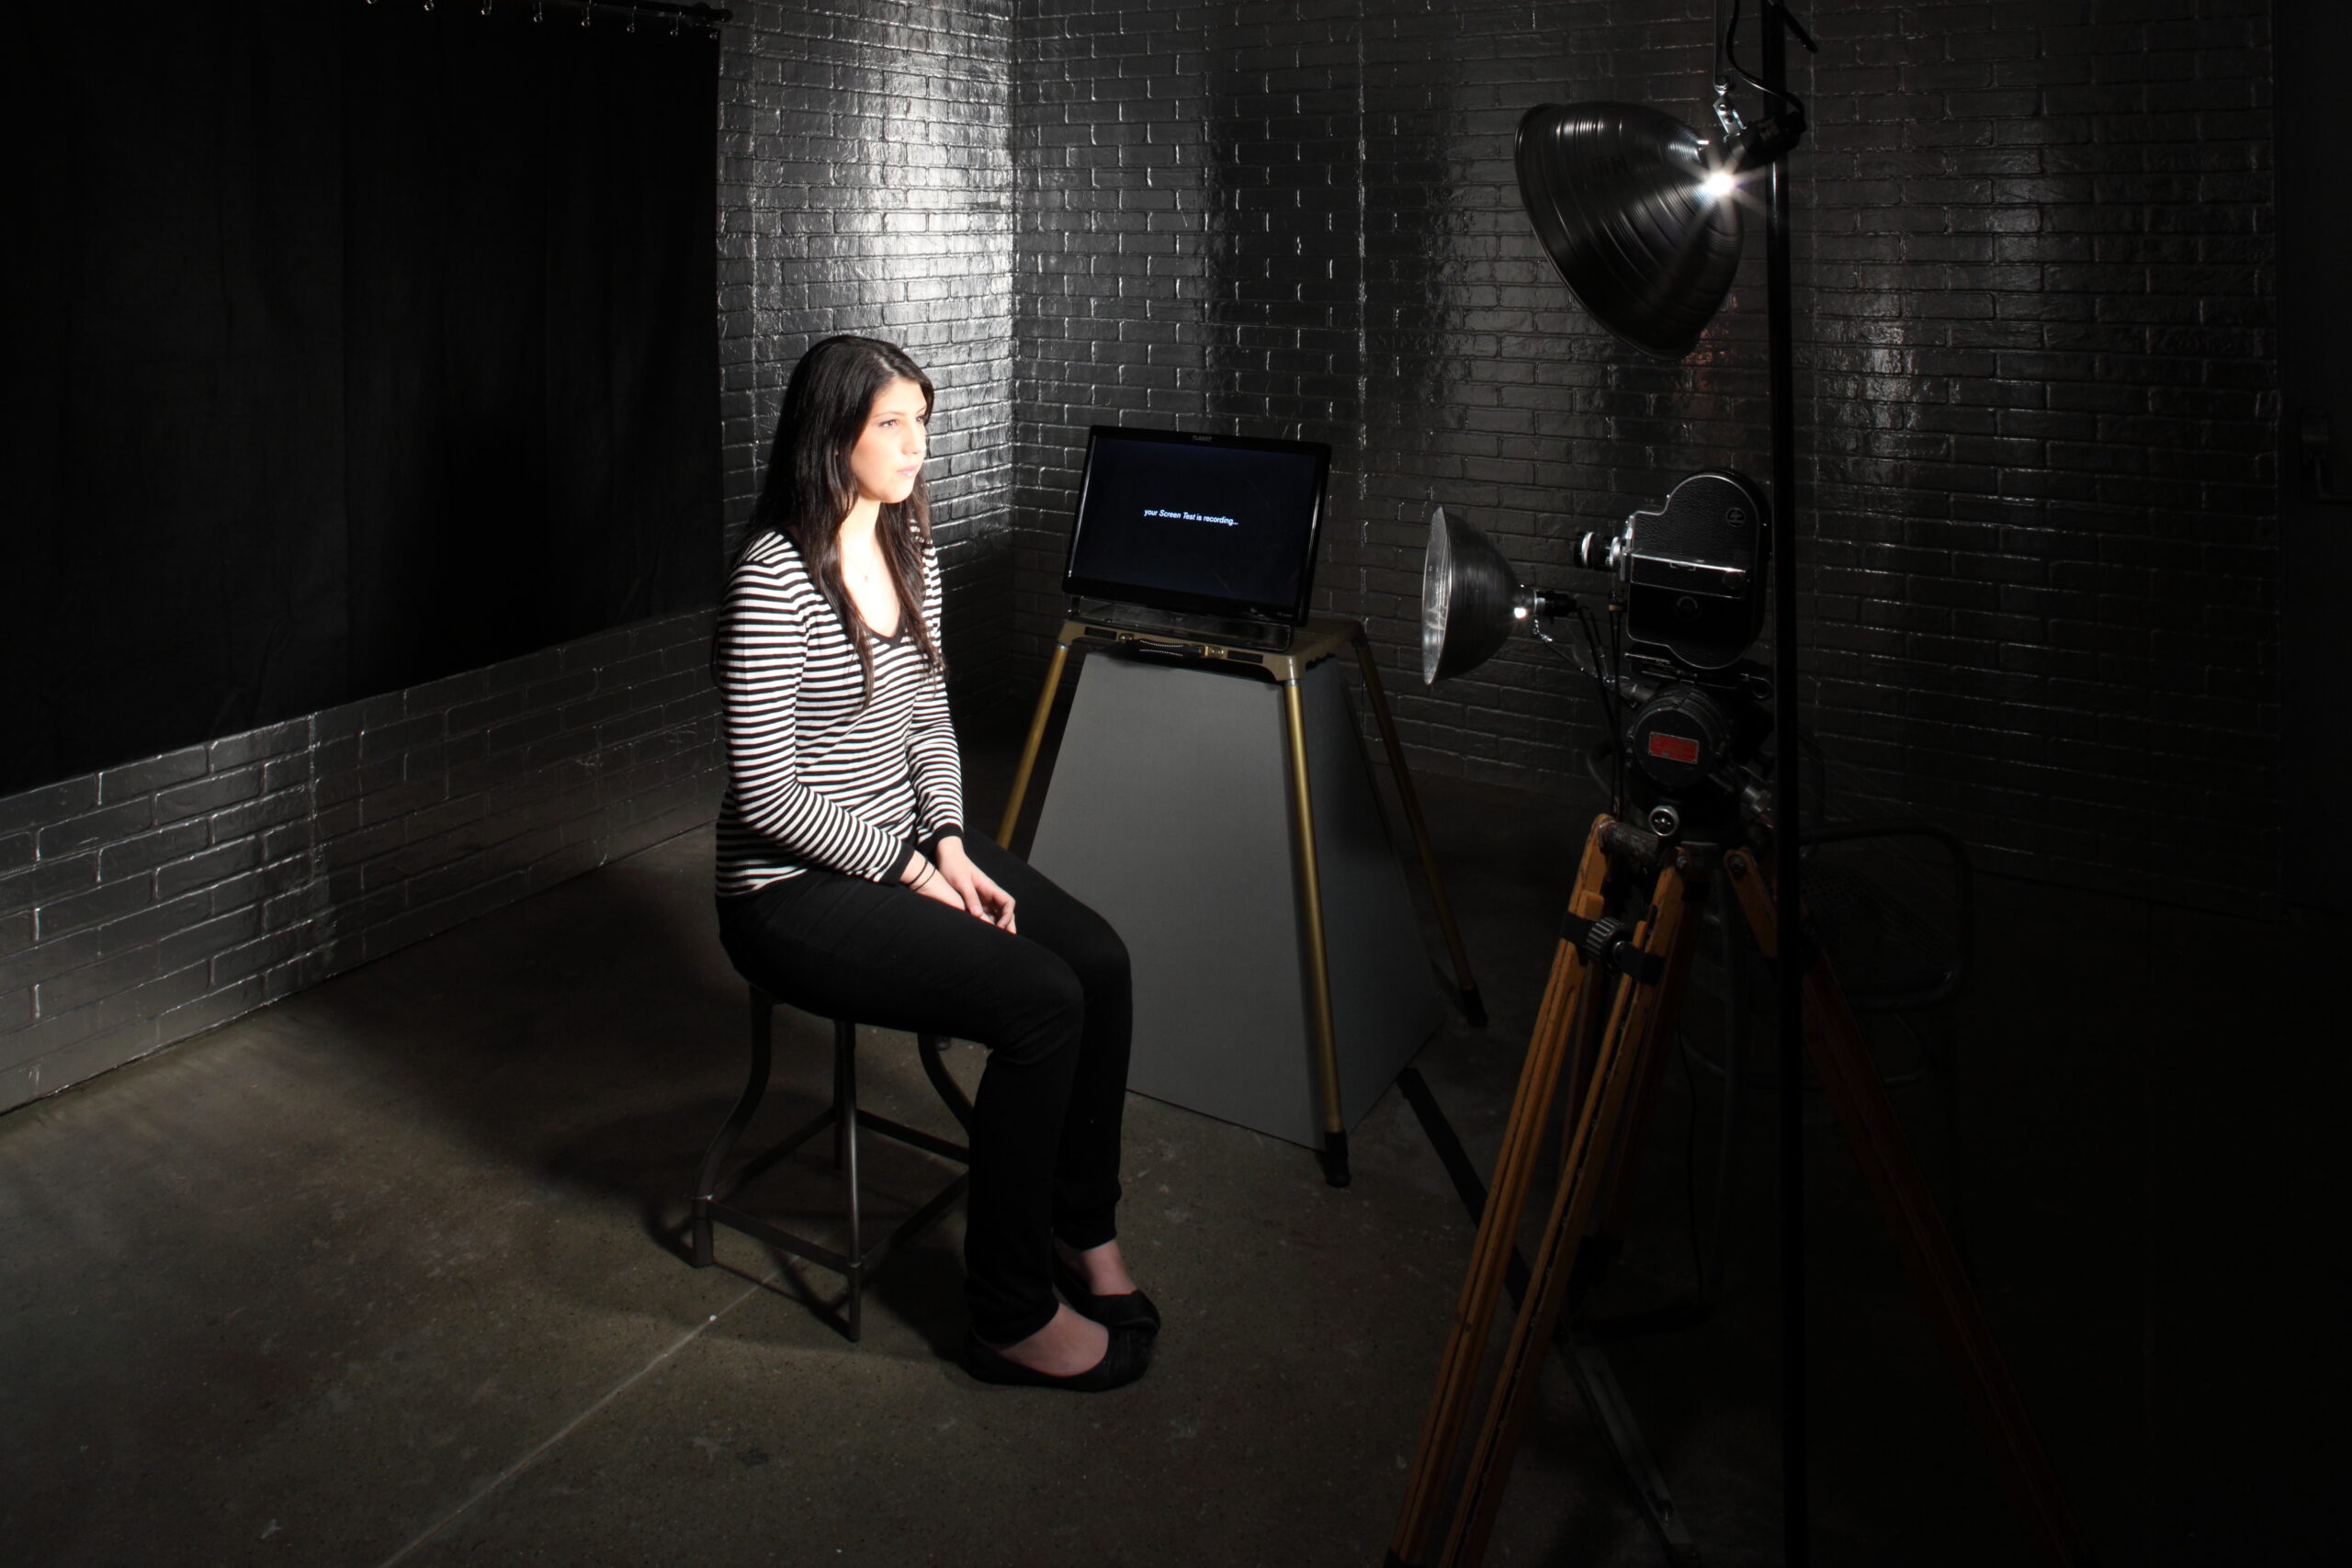 In a room with silver brick walls, a woman sits in front of an old-fashioned camera.